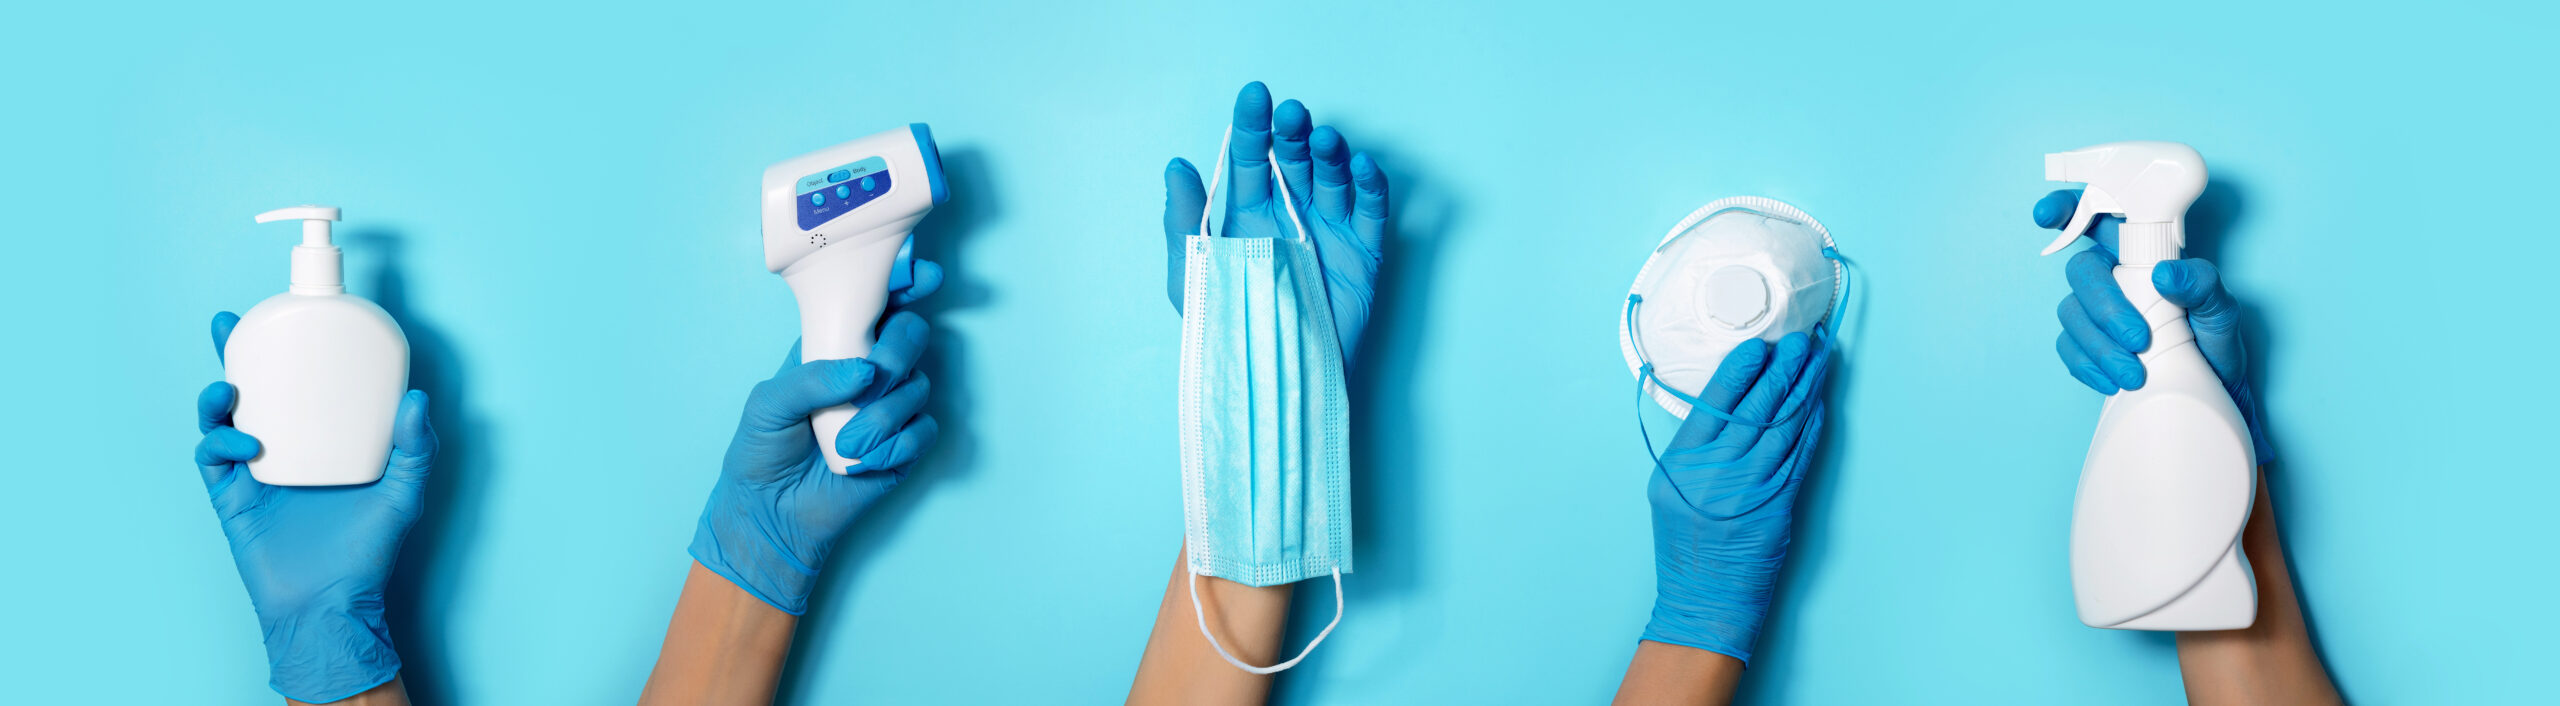 Raised hands in medical gloves holding masks, sanitizers, soap, non contact thermometer on blue background. Banner. Copy space. Health protection equipment during quarantine Coronavirus pandemic.